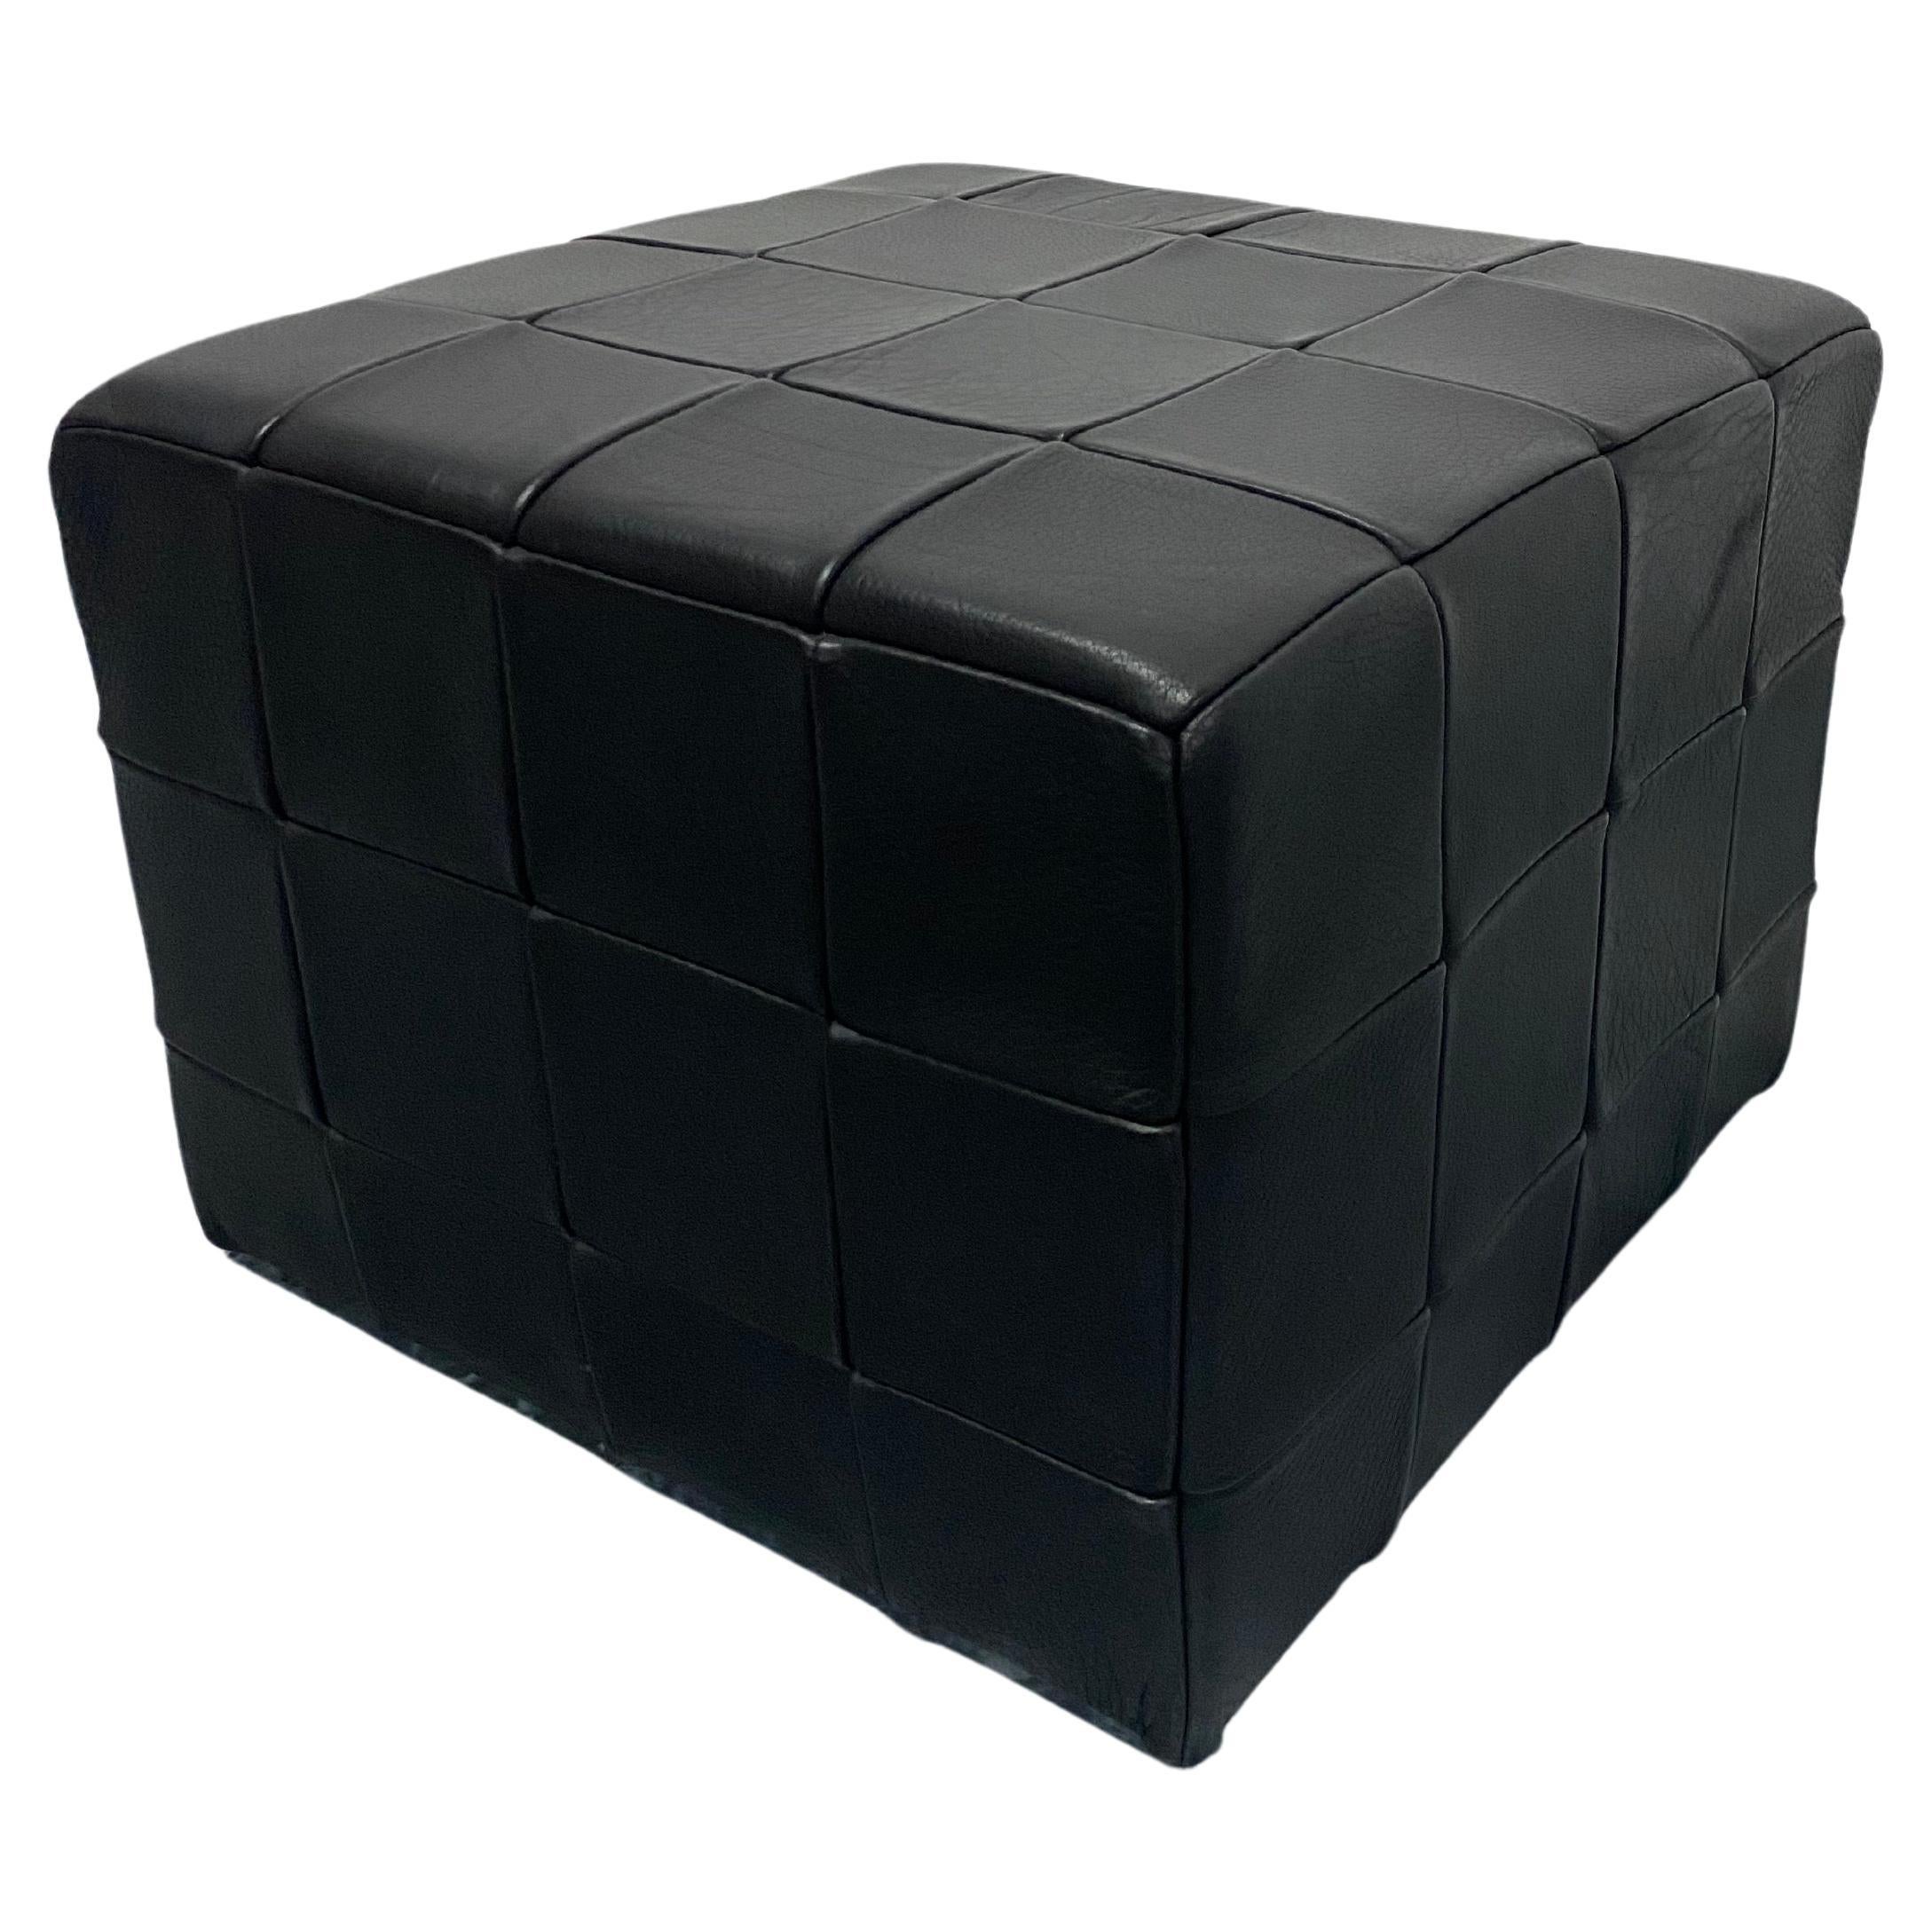 Patchwork Black Leather Pouf or Ottoman, Denmark 1970s